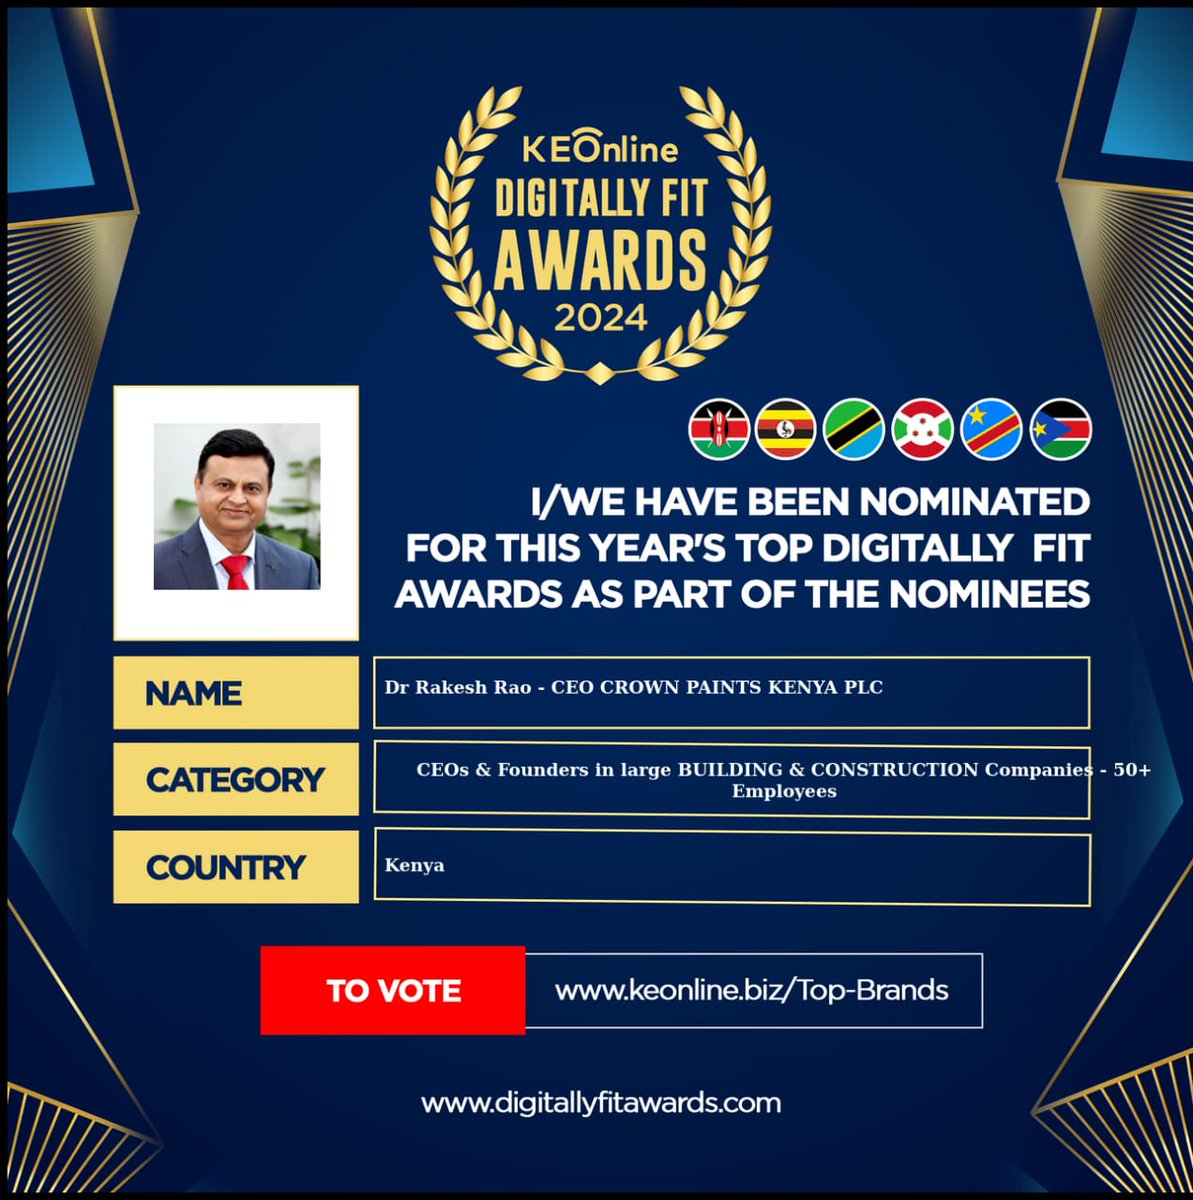 Each nominee represents a unique aspect of Kenya's digital landscape, showcasing diversity and innovation across various industries. Person of the Year KEONLINE #DigitallyFitAwardsVote2024